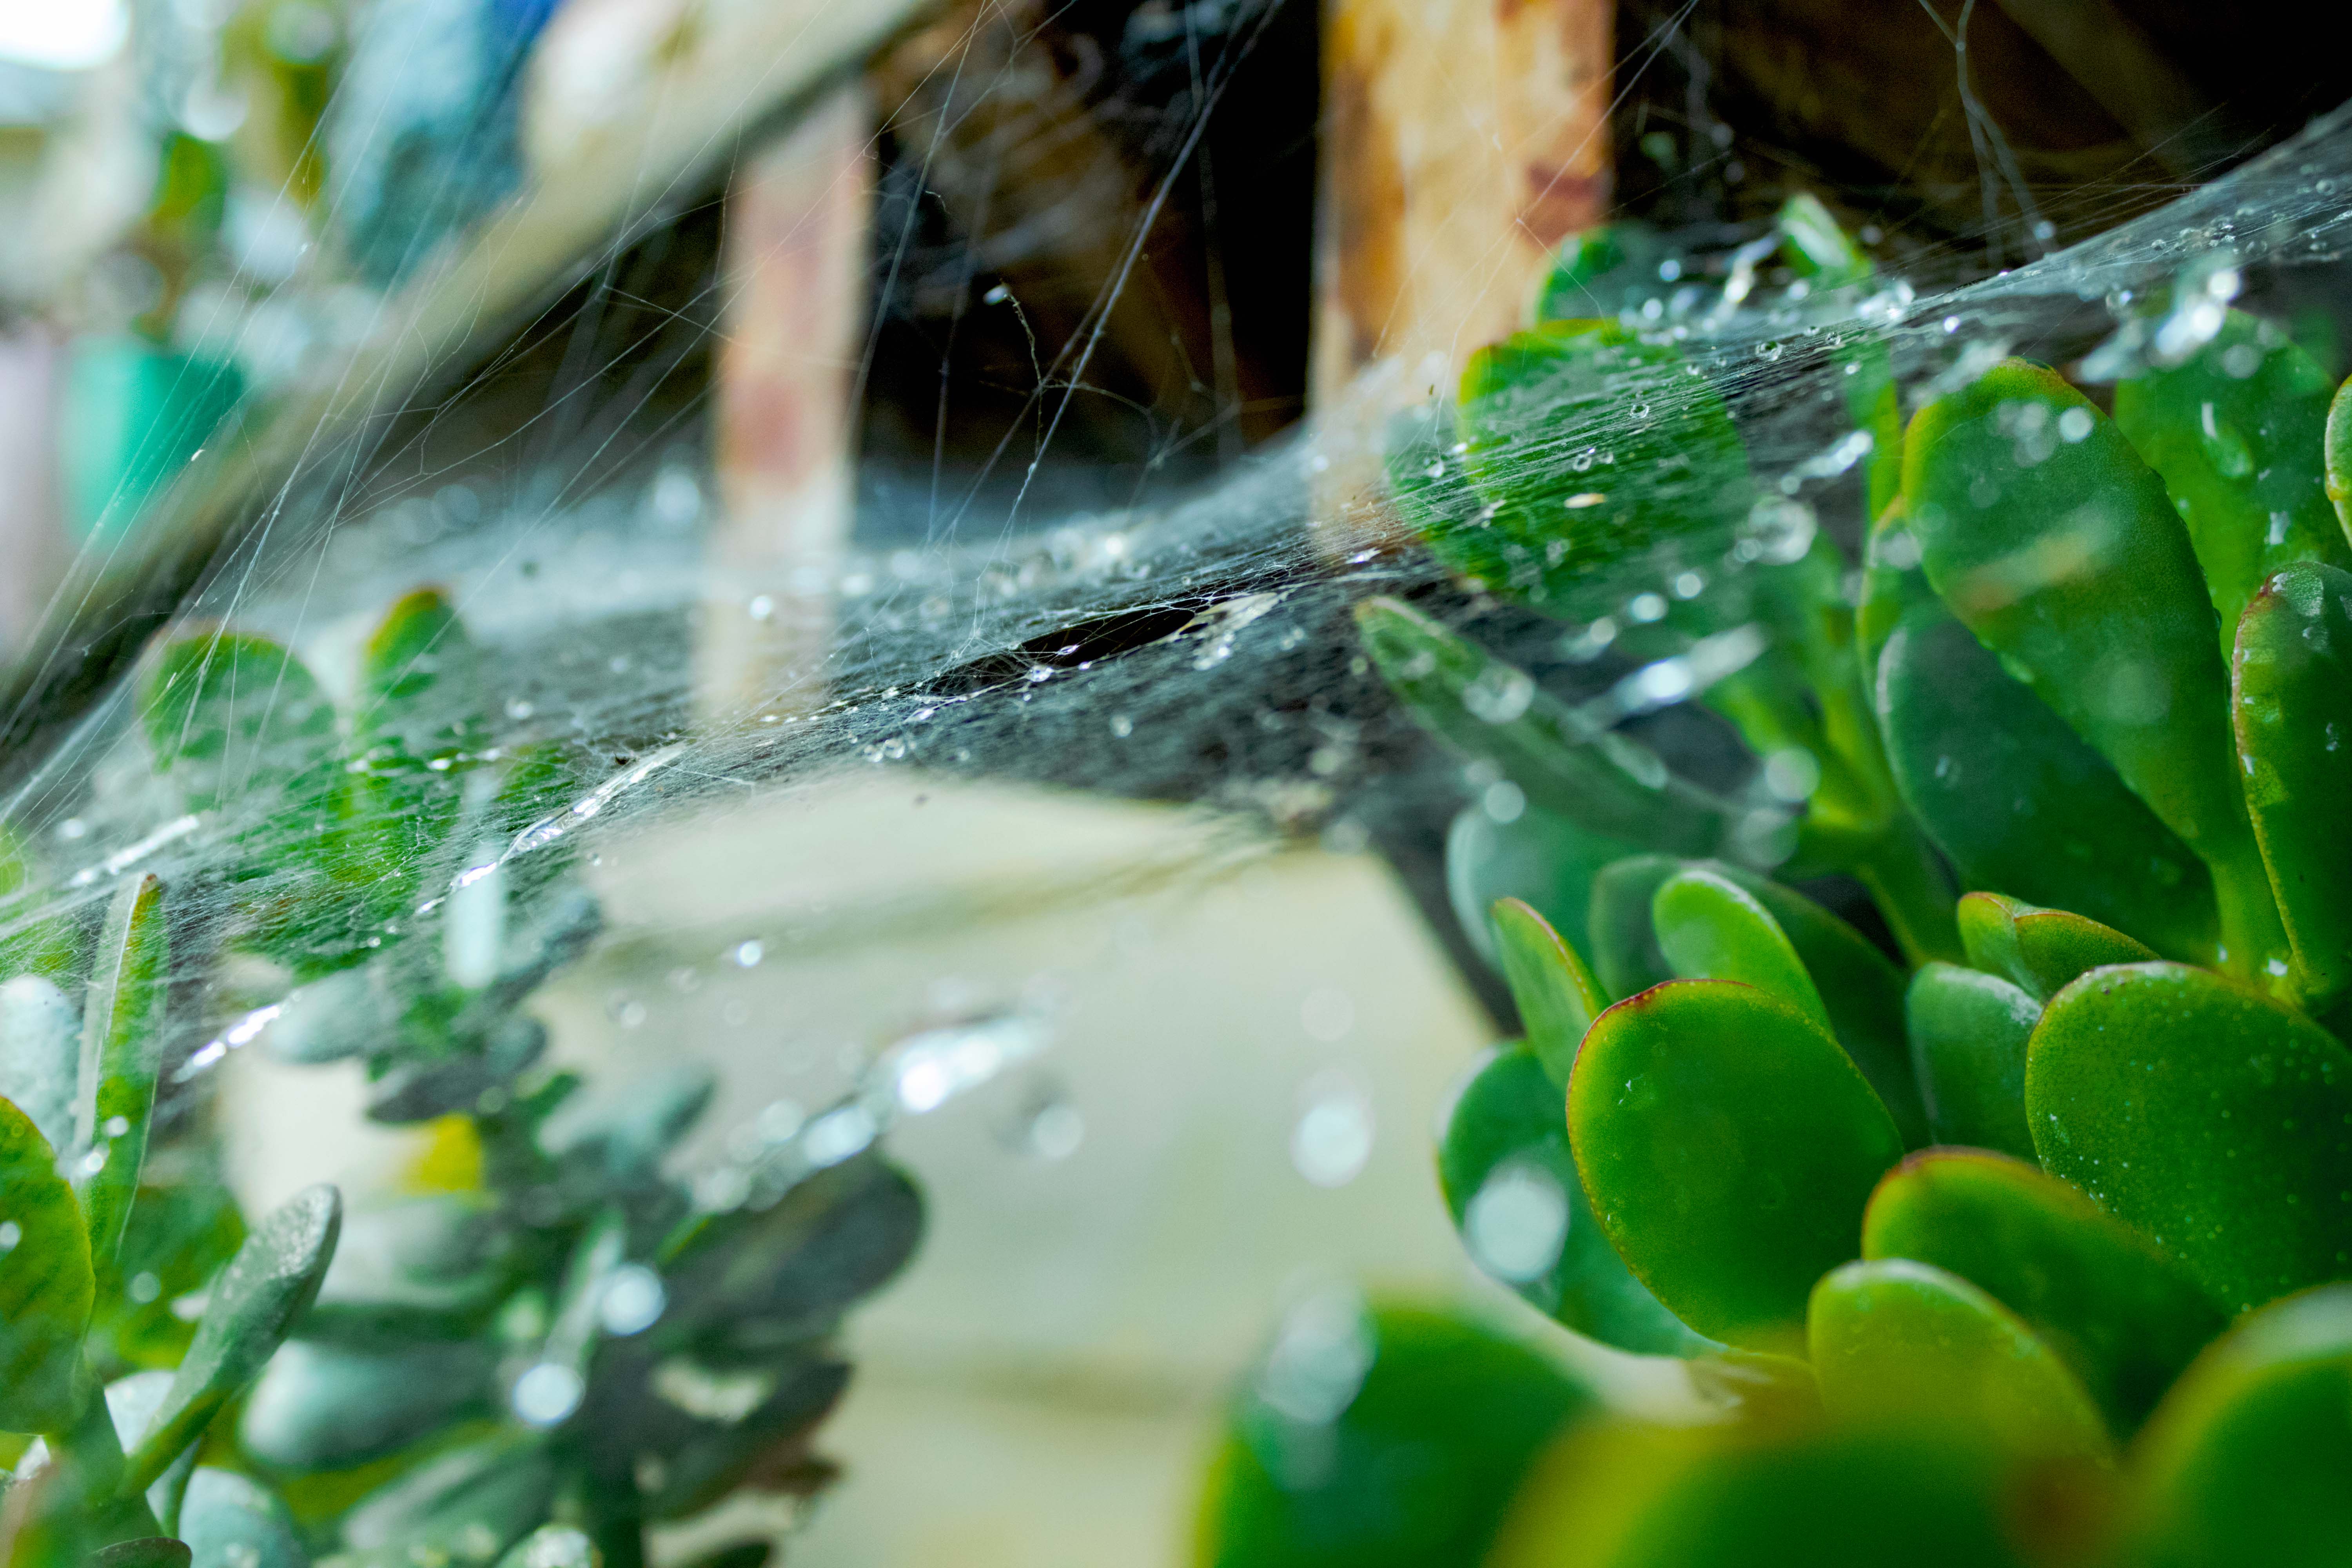 Spider web with succulents and water droplets